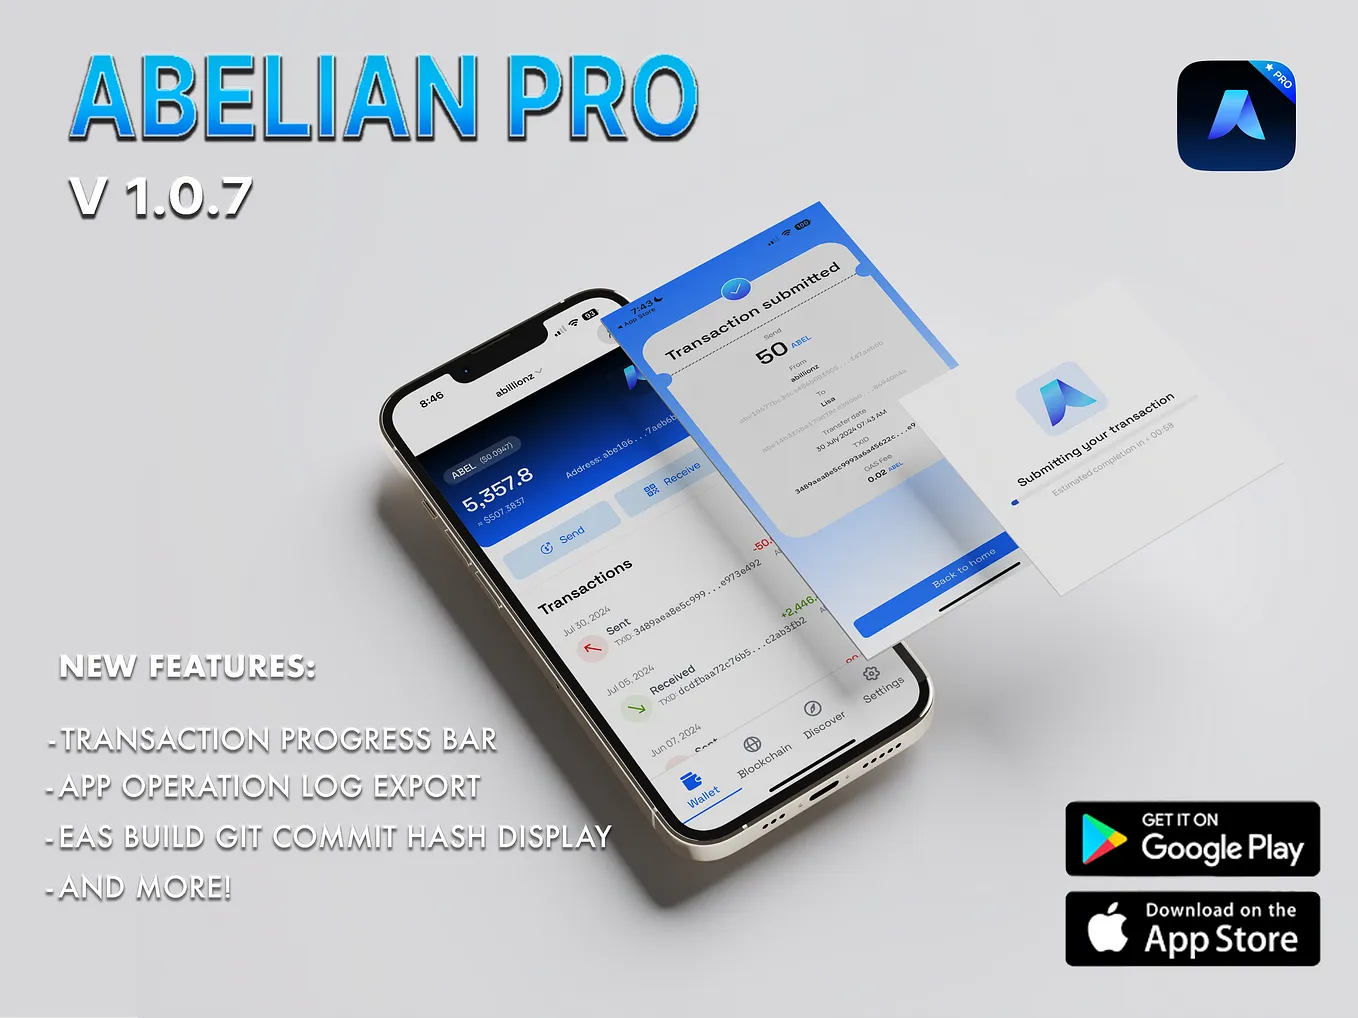 Abelian Pro Mobile Wallet Update: Version 1.0.7 Now Available!